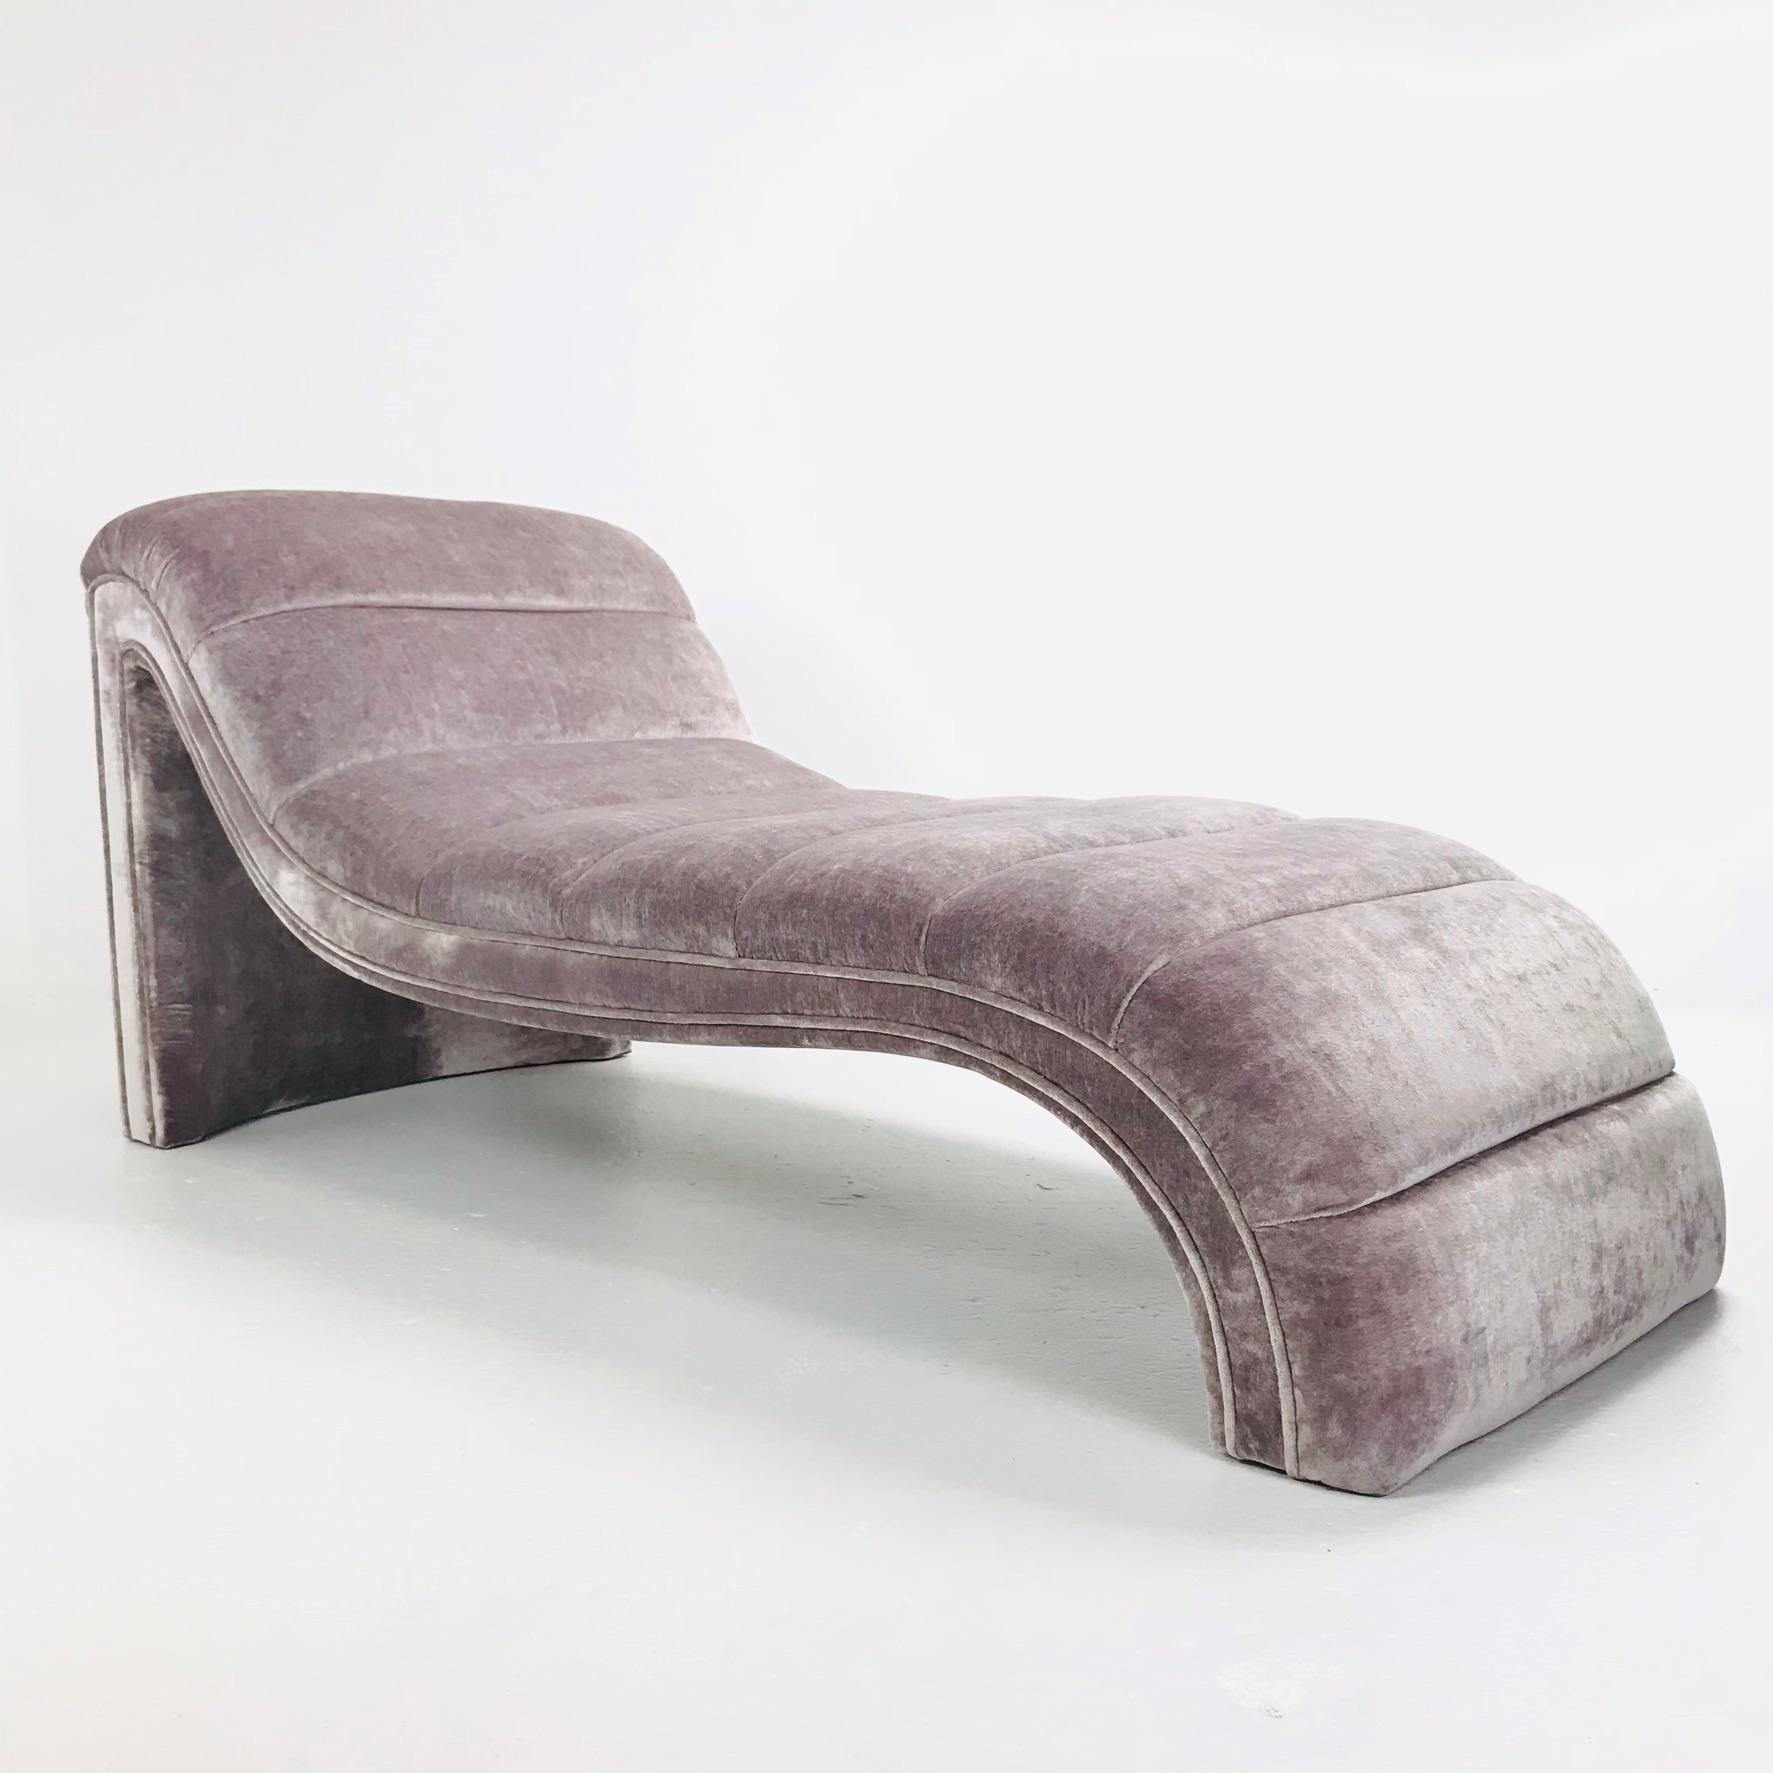 Upholstery Custom Channeled Chaise Lounge